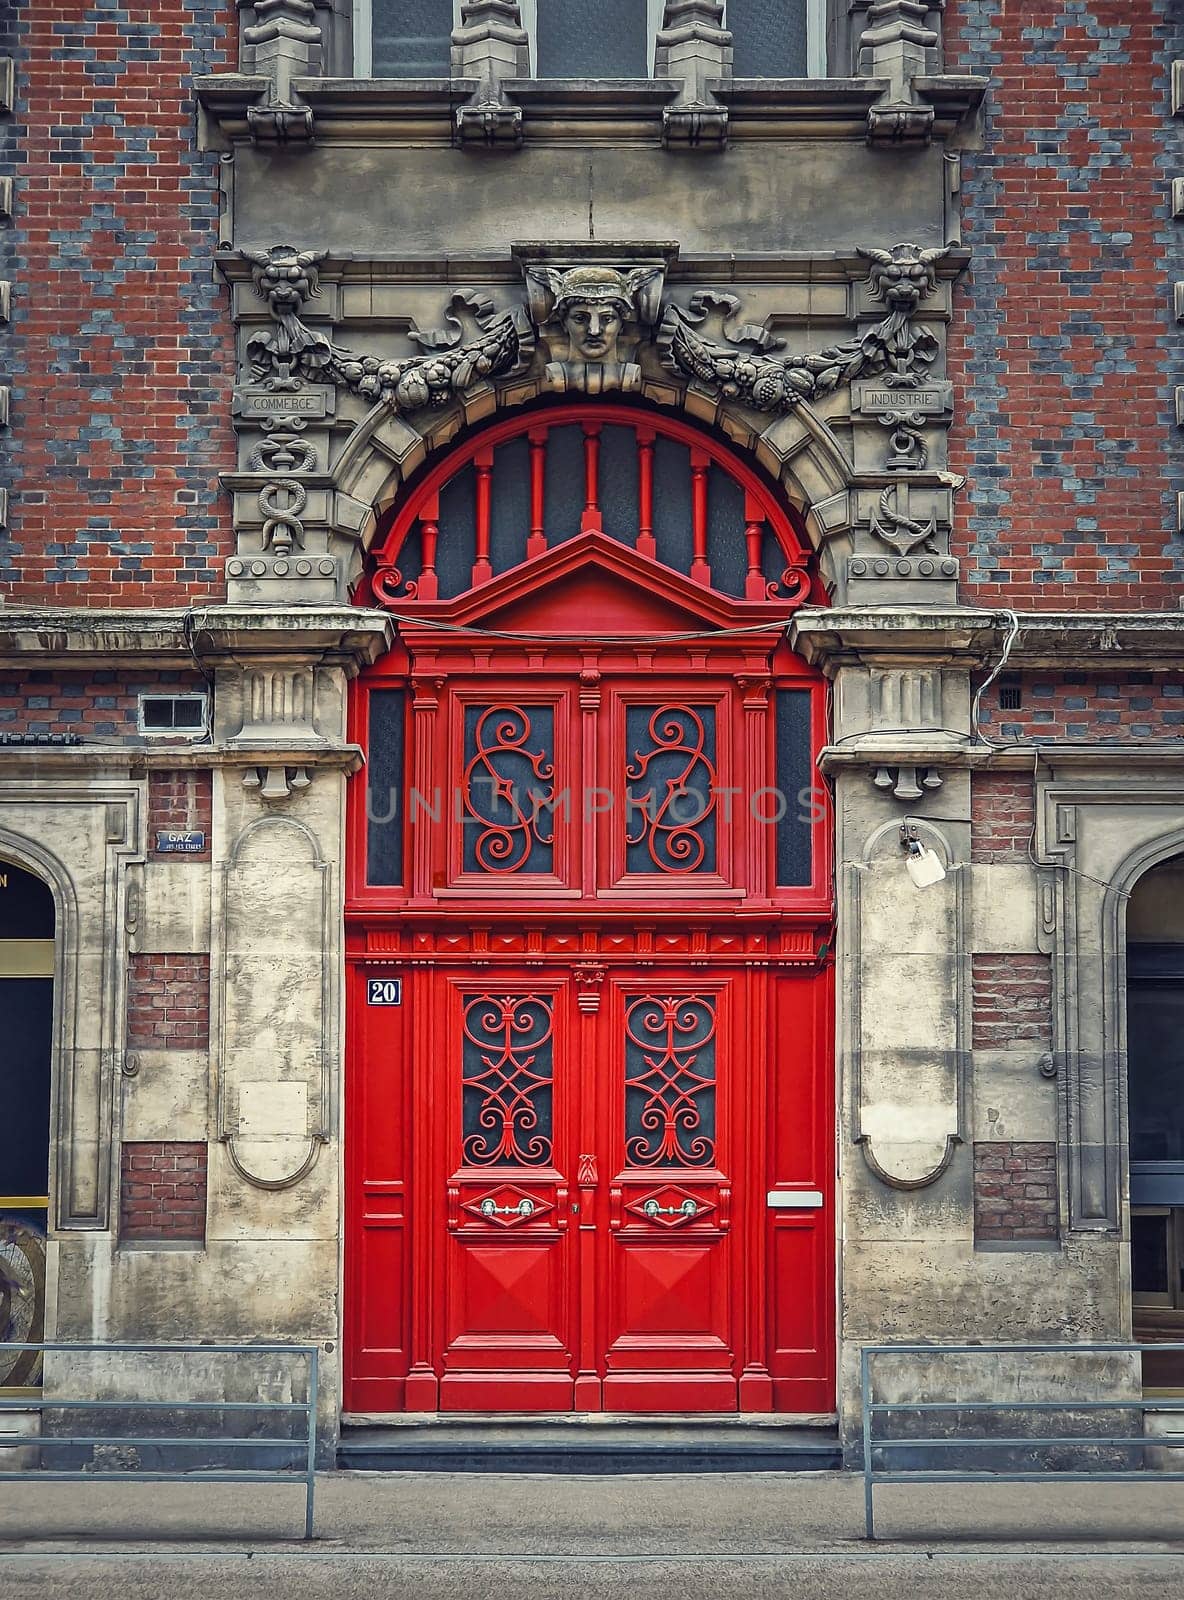 Vintage red door and ornate facade details of an old historical building in Rouen, France. Rustic outdoors architecture elements, big wooden gate as main entrance by psychoshadow